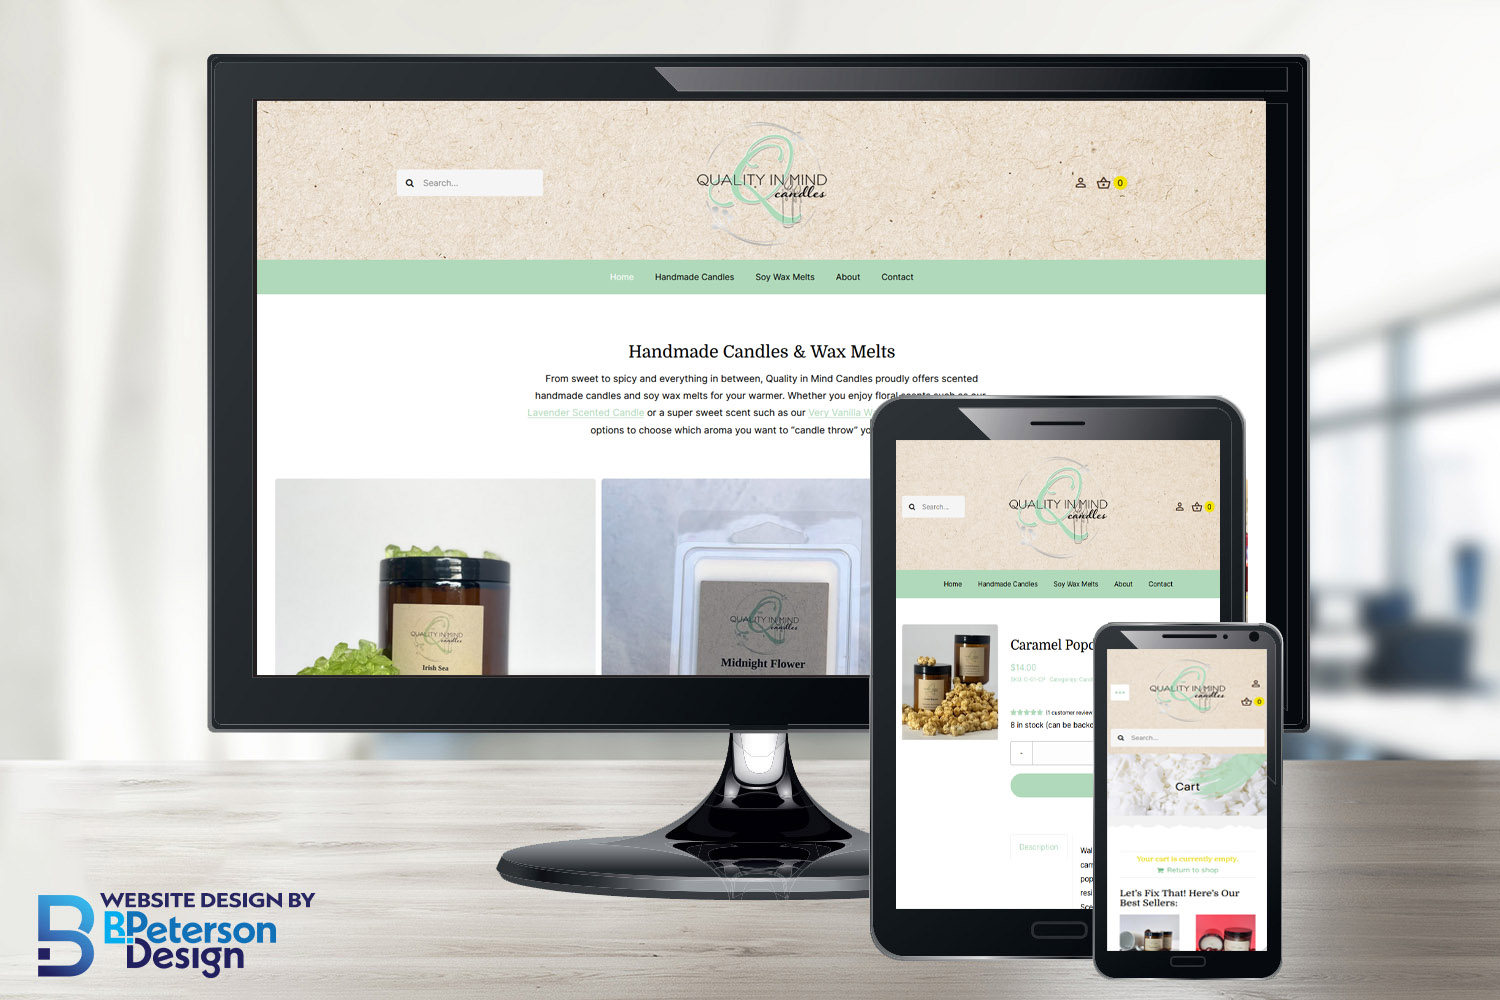 Quality in Mind Candles new e-commerce web design shown on responsive screens